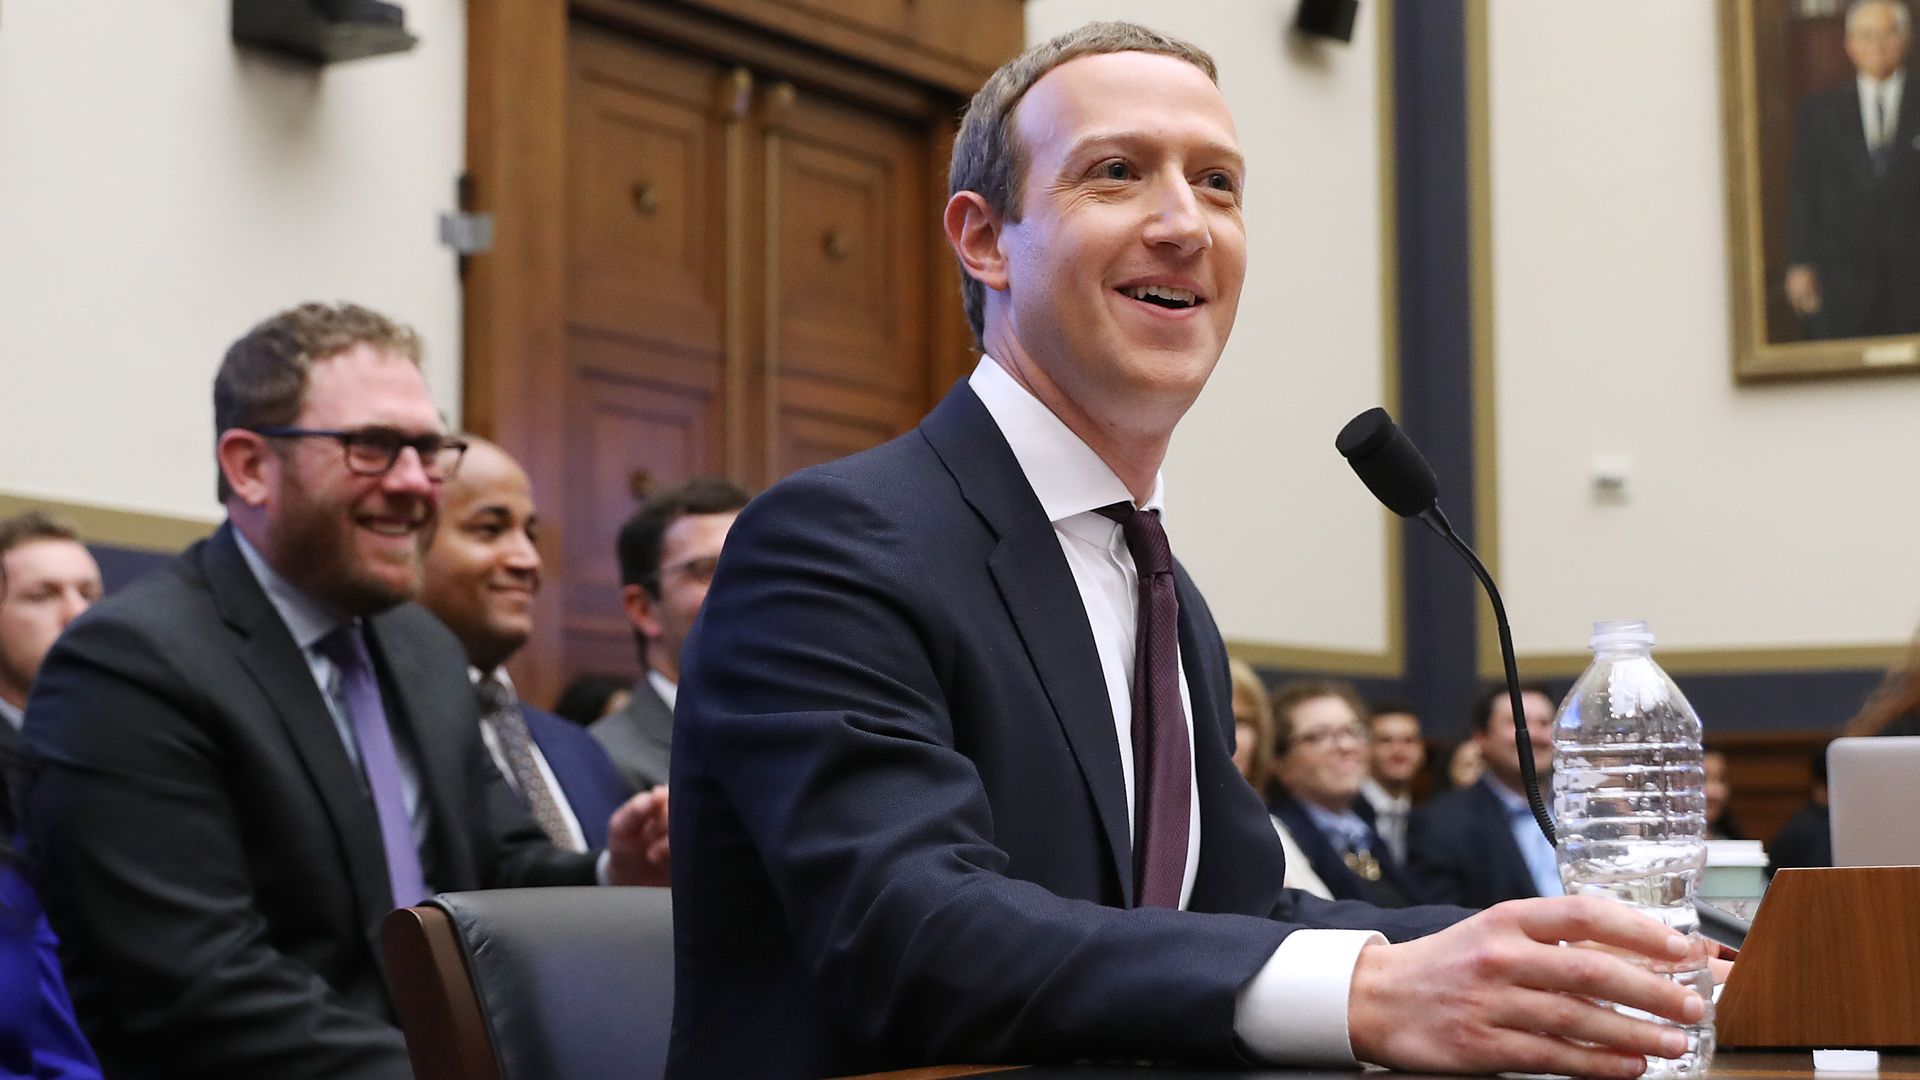 Facebook co-founder and CEO Mark Zuckerberg testifies before the House Financial Services Committee 